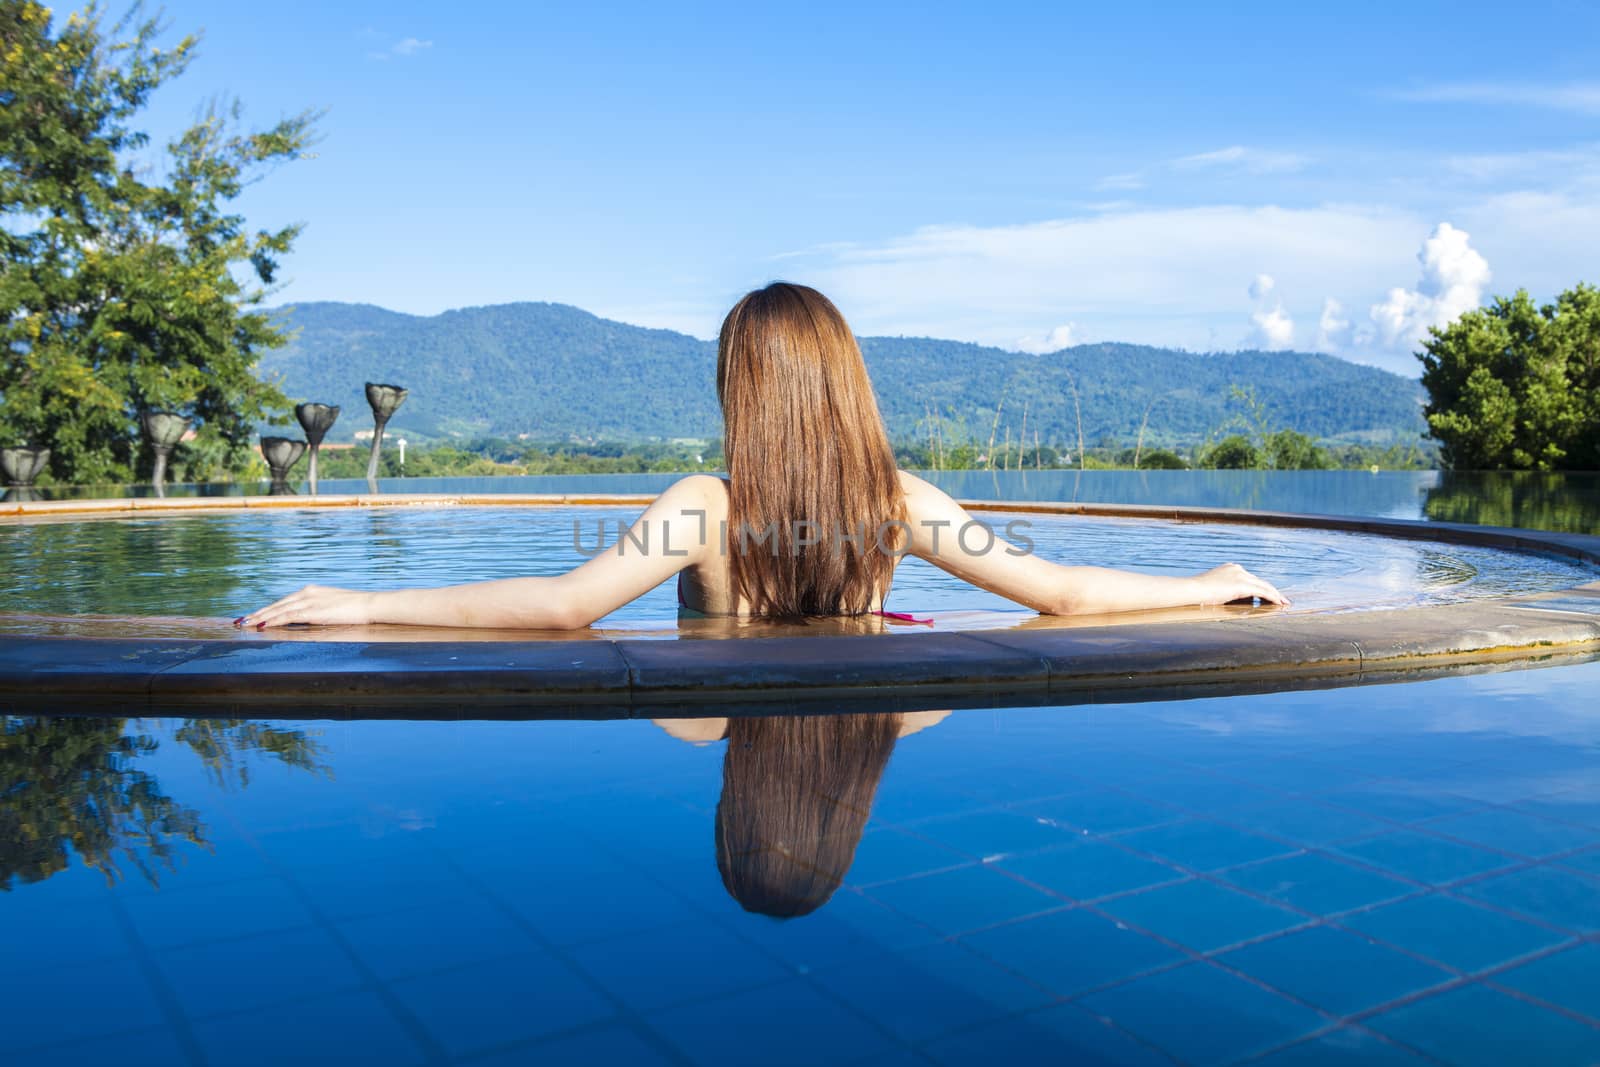 Woman relaxing in infinity swimming pool looking at view,Morning woman at the pool